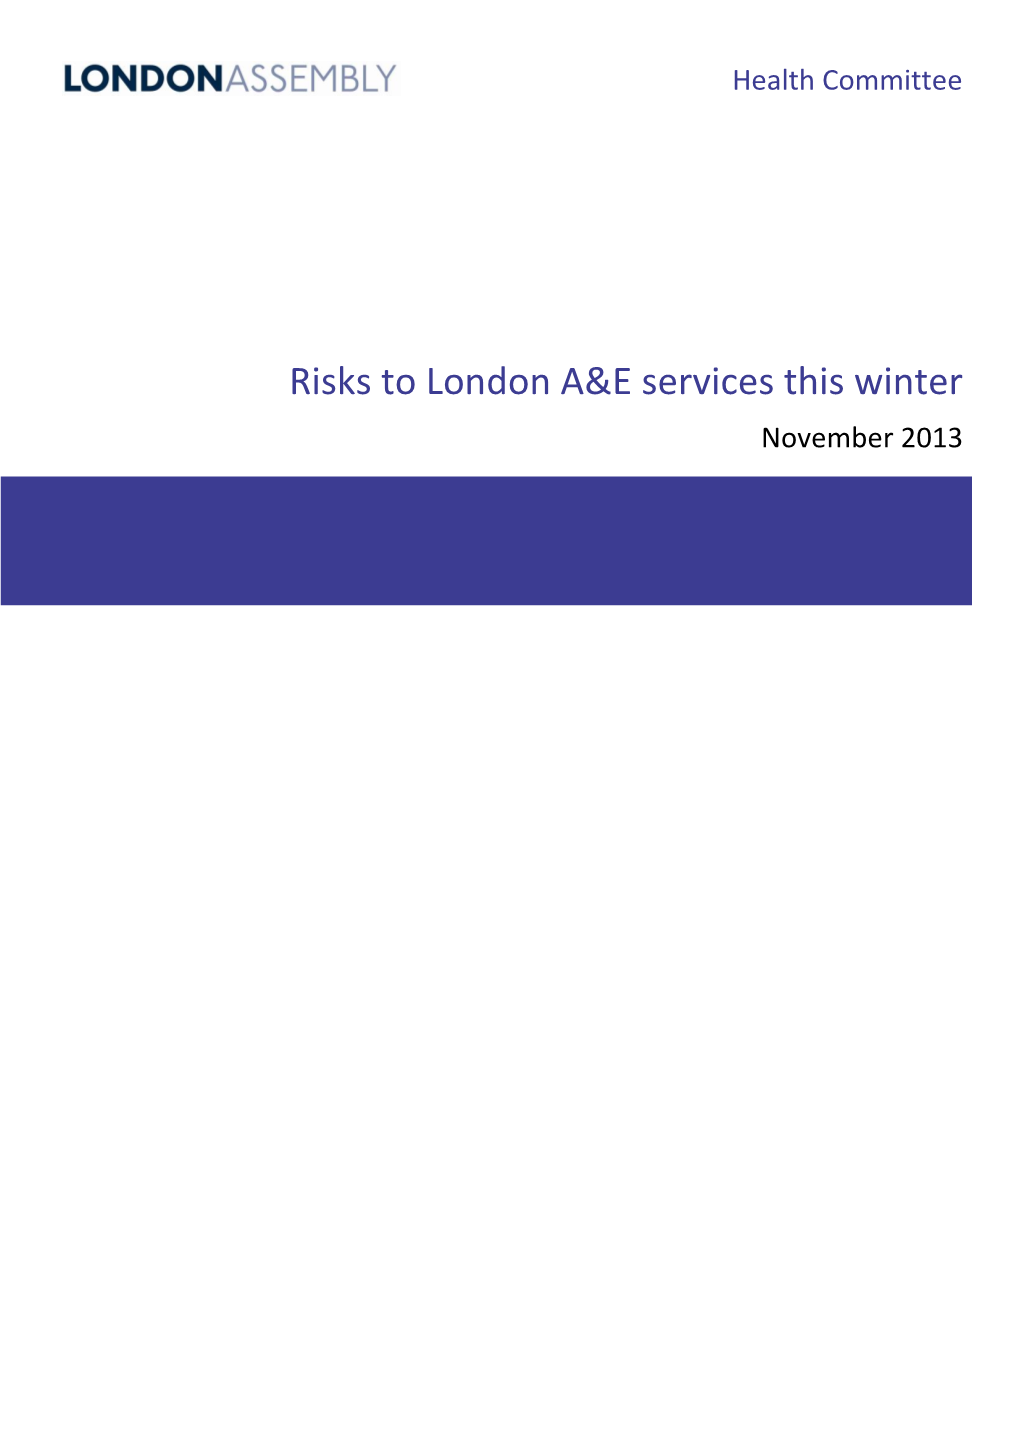 Risks to London A&E Services This Winter